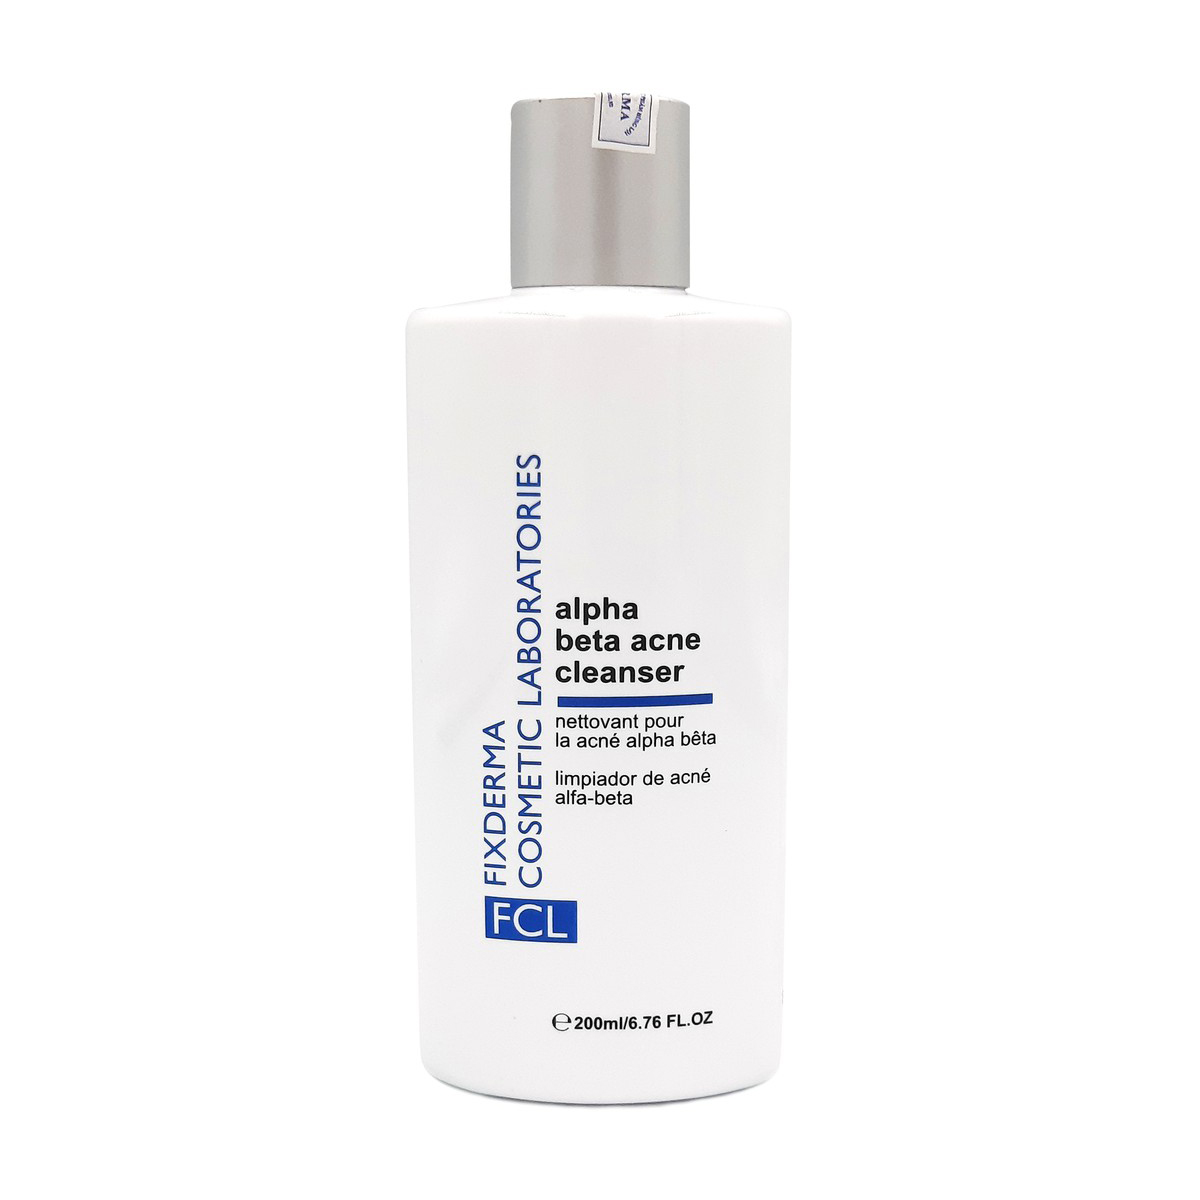 FCL alpha beta acne cleanser